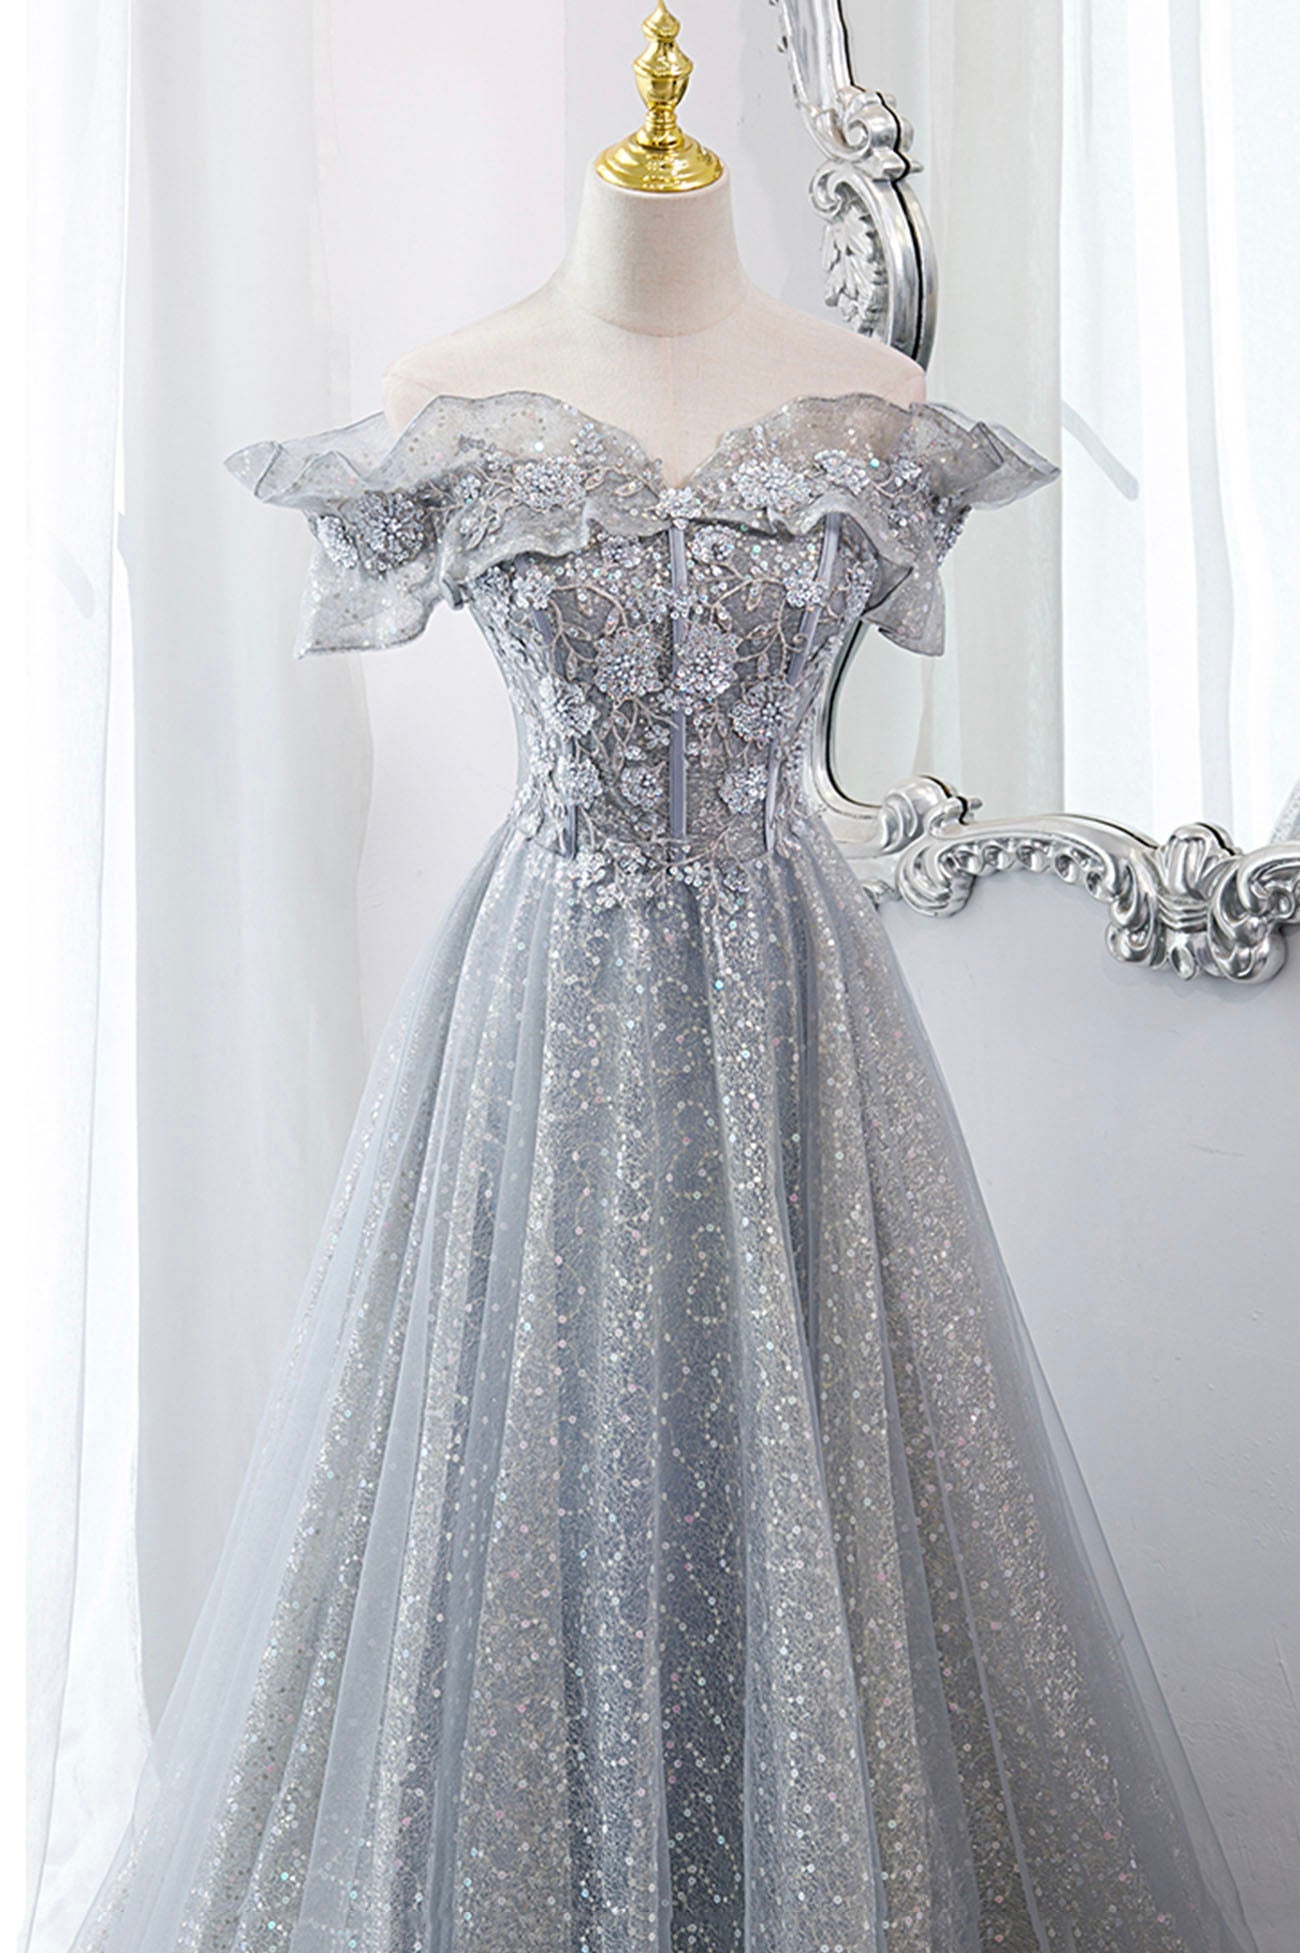 Gray Tulle Lace Long Corset Prom Dresses, A-Line Sequins Evening Dresses outfit, Prom Dresses Websites